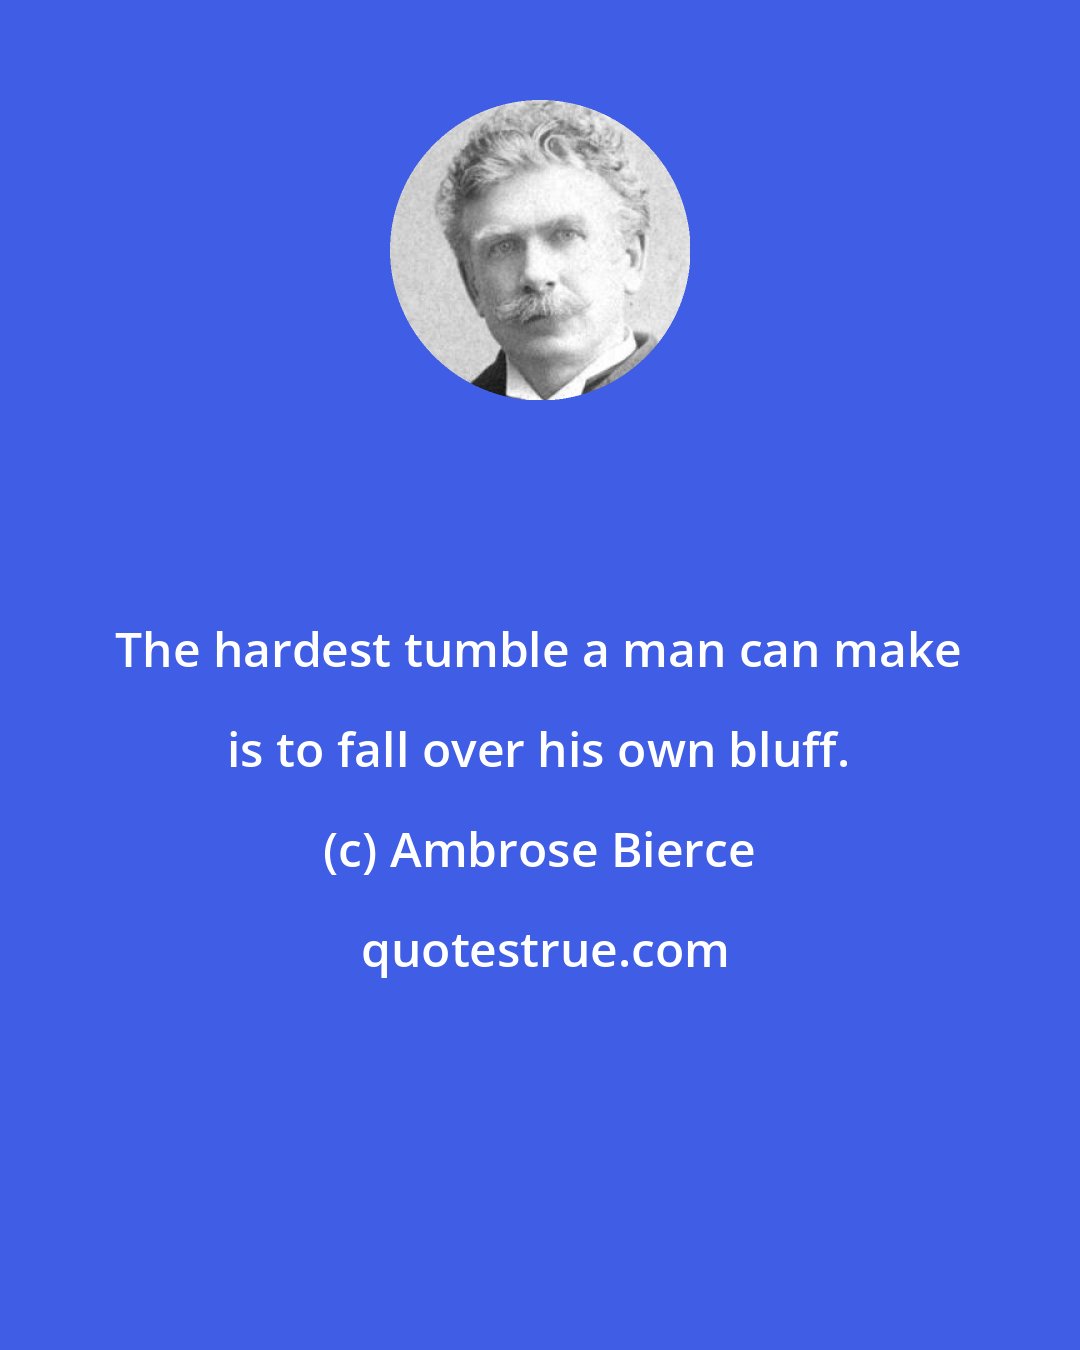 Ambrose Bierce: The hardest tumble a man can make is to fall over his own bluff.